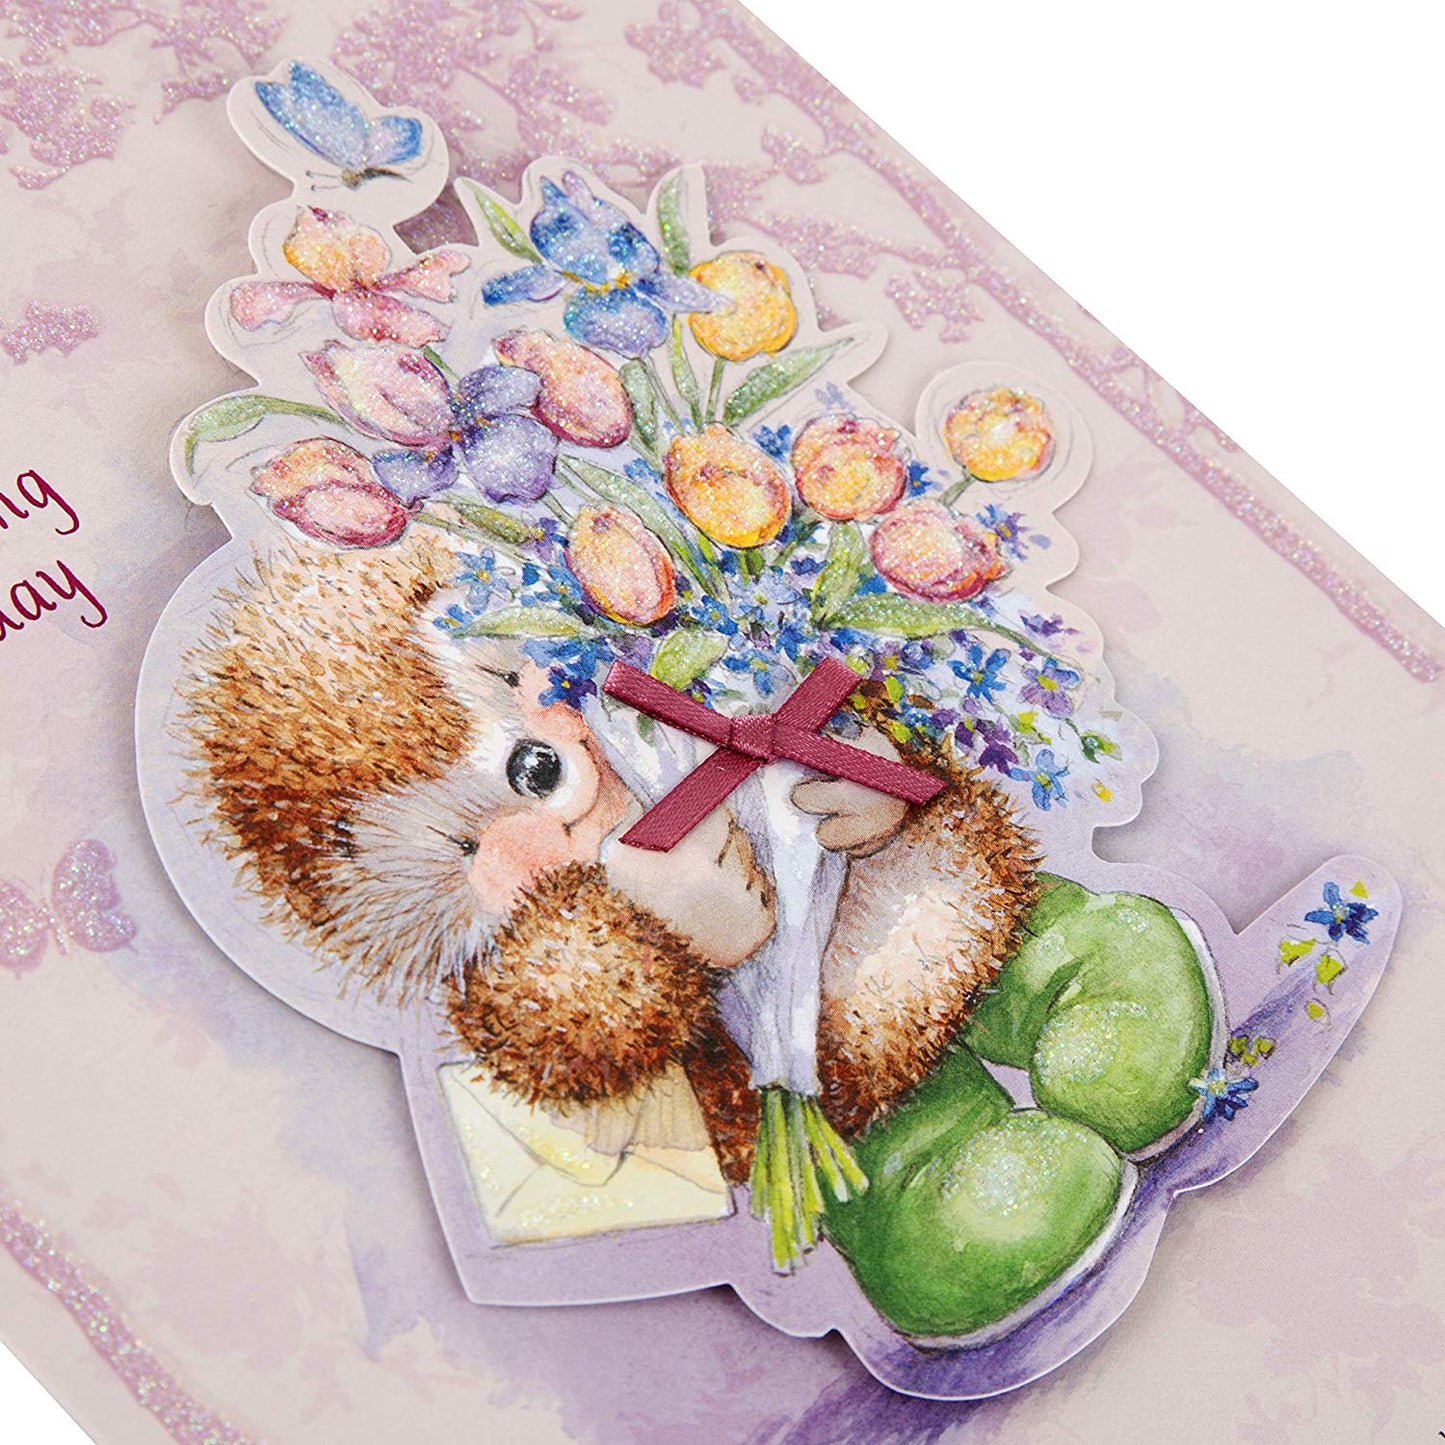 'Lovely Day' Mothering Sunday Mother's Day Greeting Card